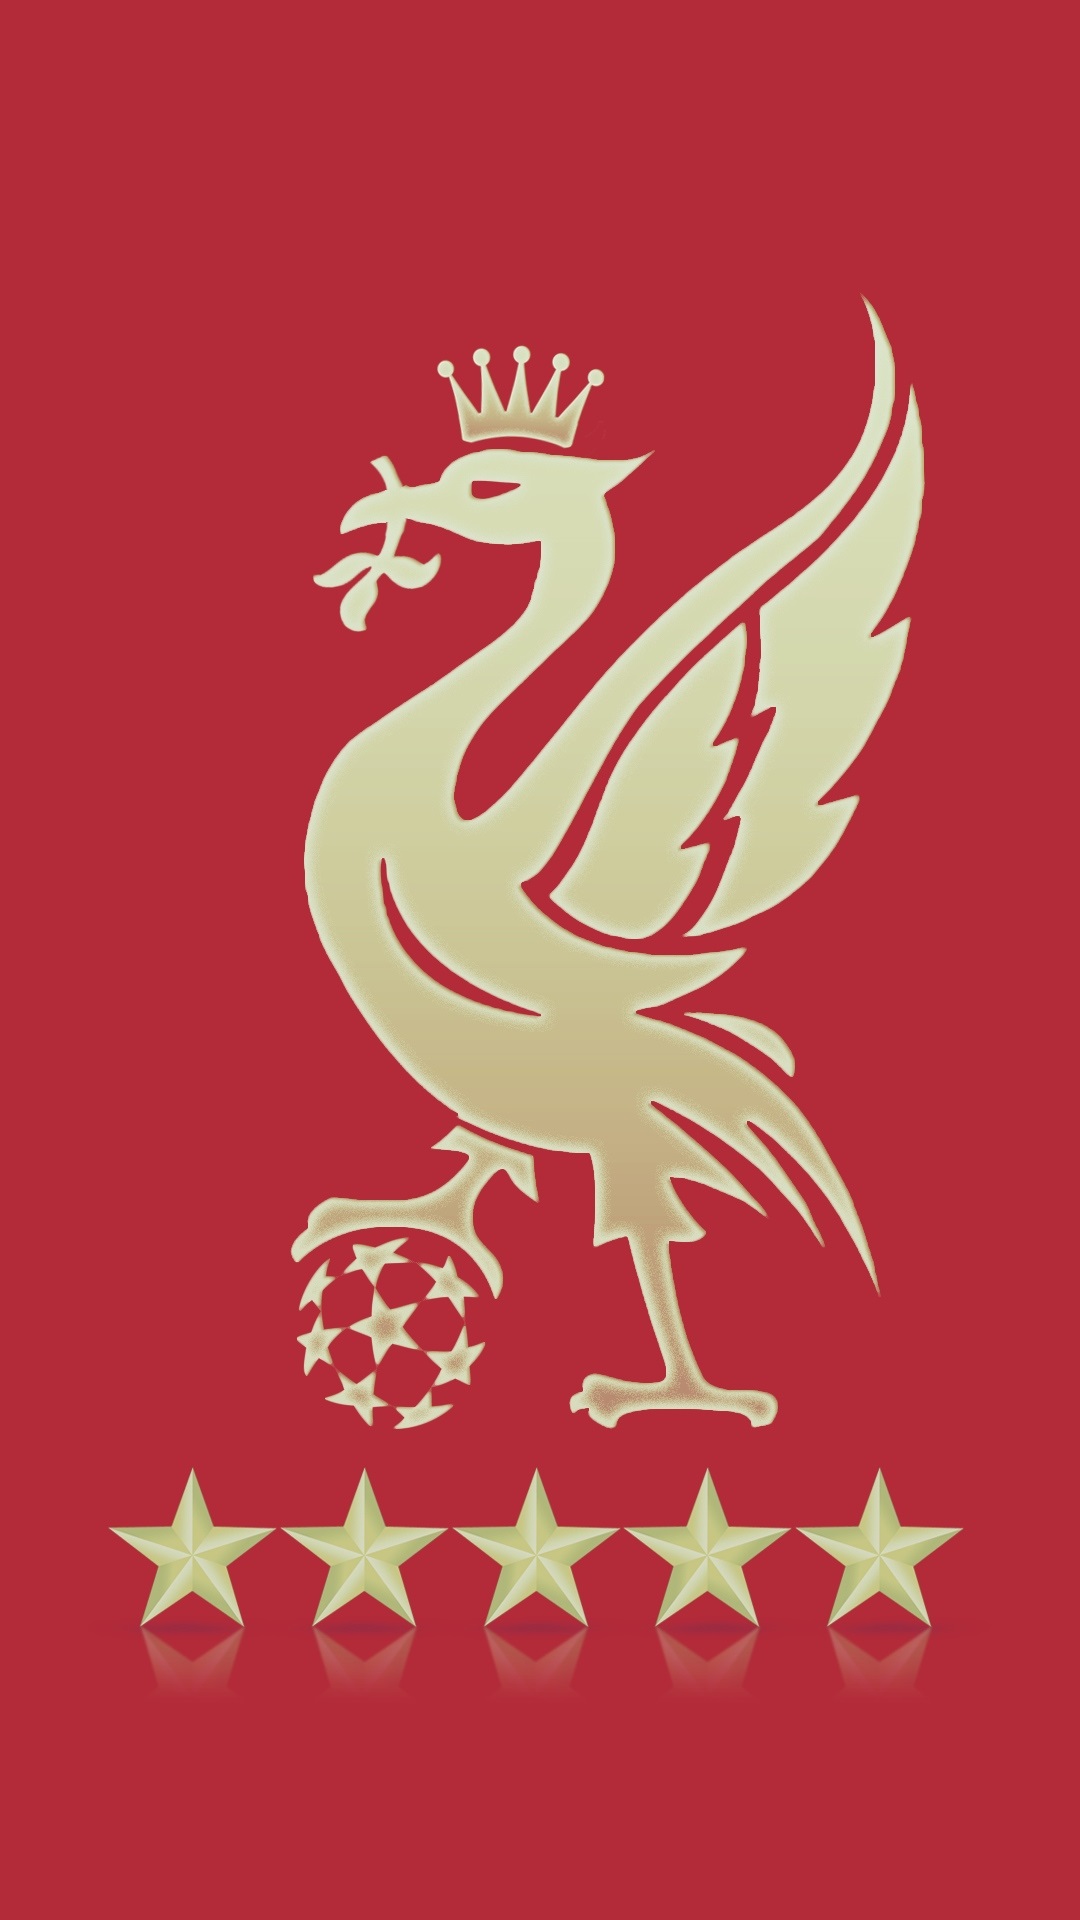 Liverpool Fc Hd Logo Wallpapers For Iphone And Android Mobiles Liverpool Core